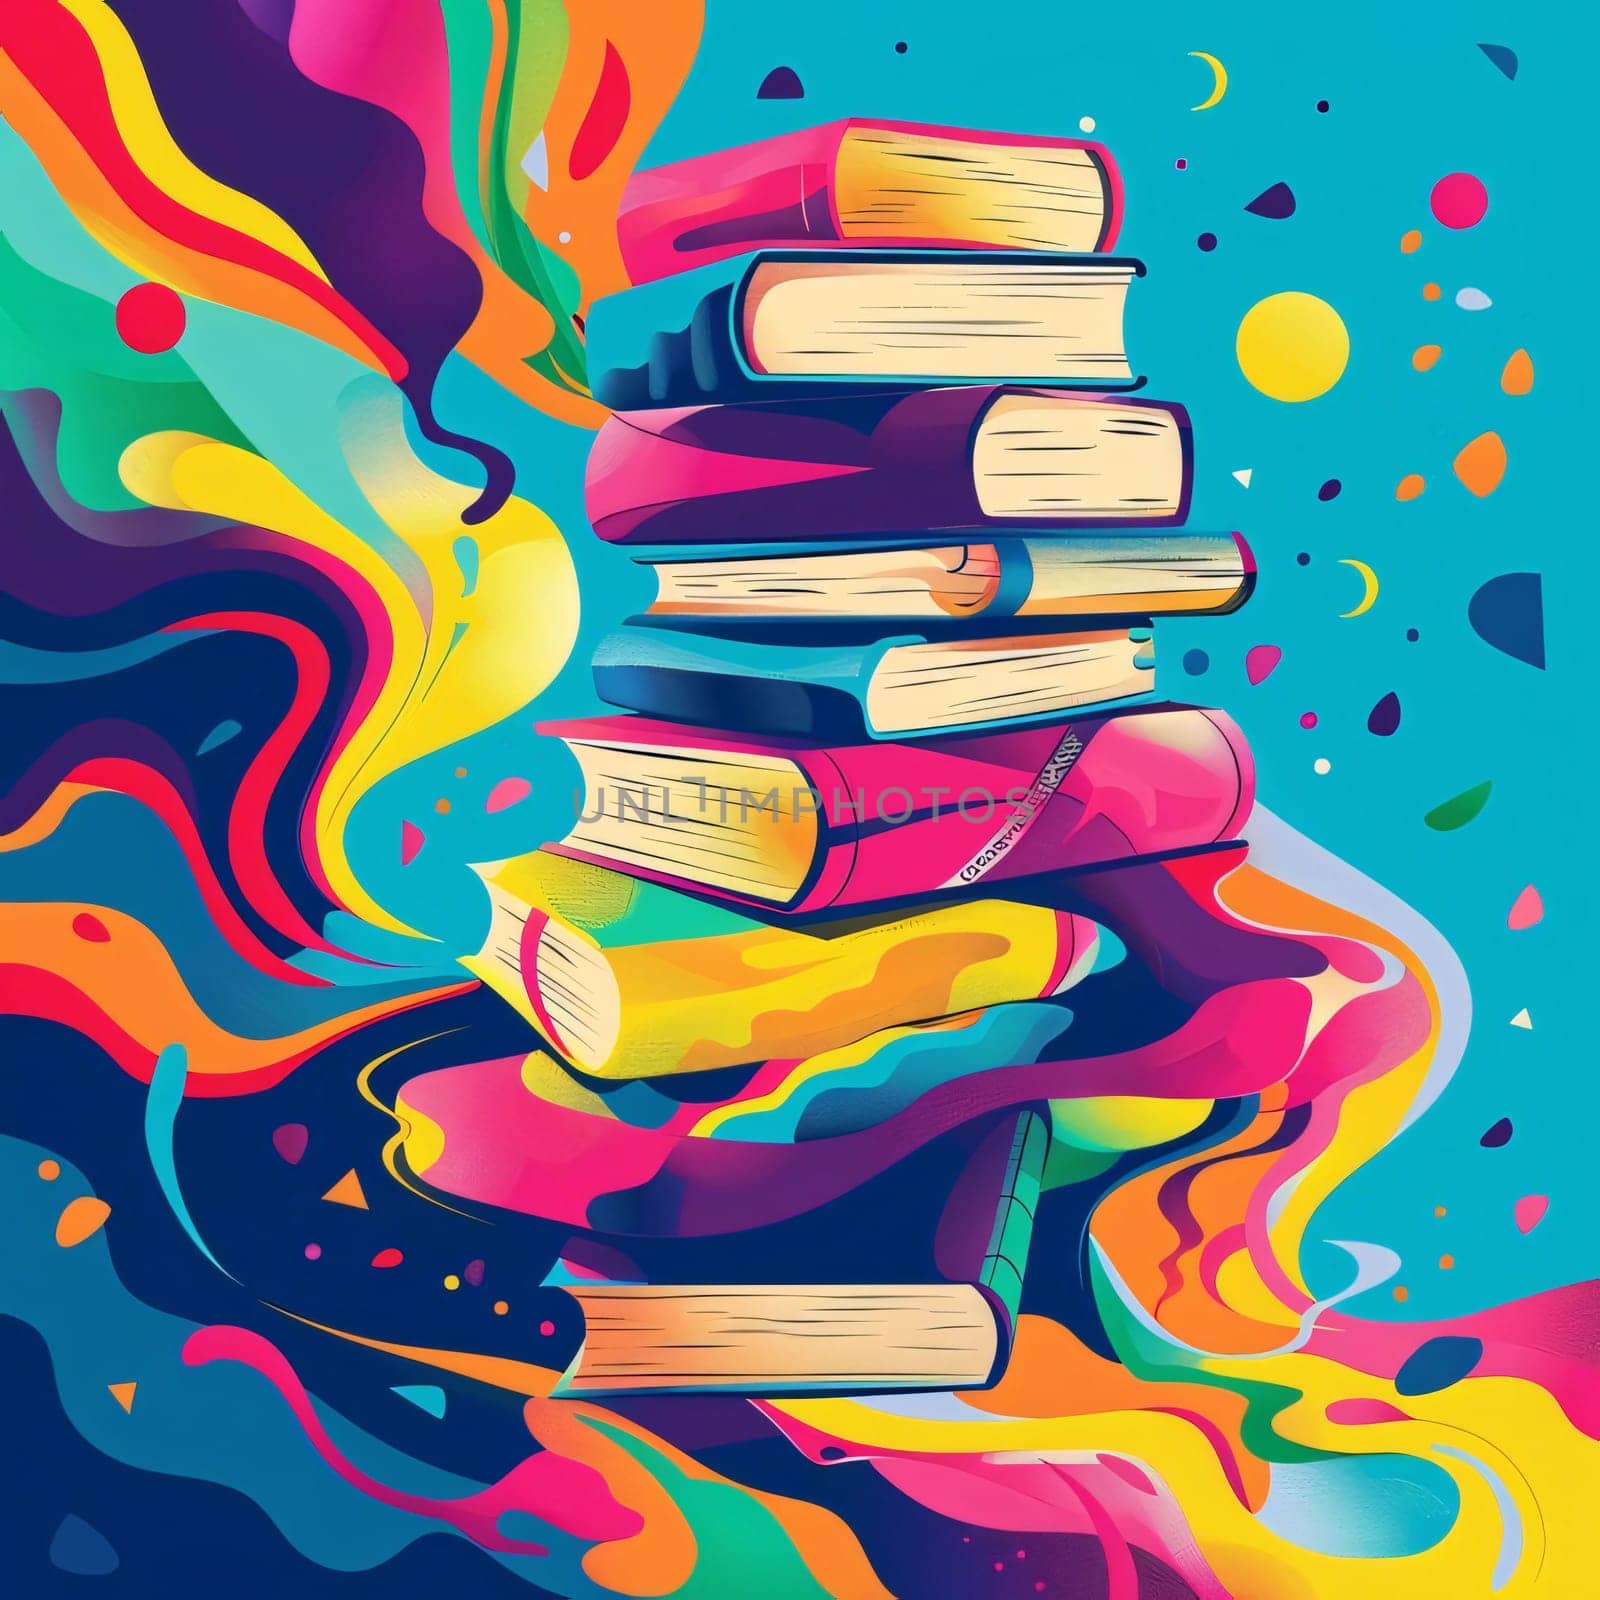 World Book Day: Pile of colorful books on abstract colorful background, vector illustration.